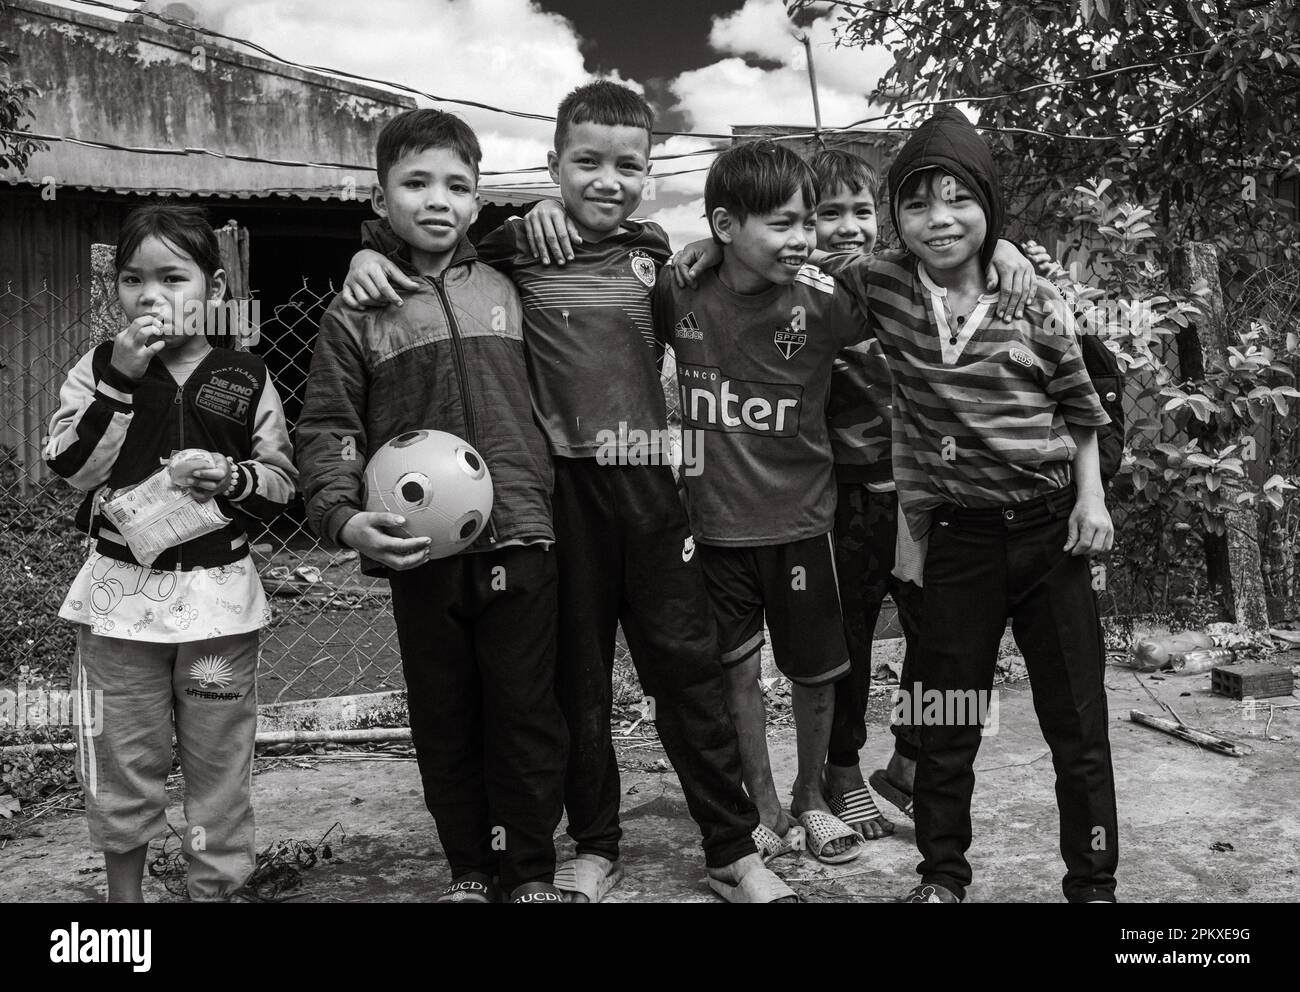 A group of Jerai ethnic minority children with a football in Gia Lai province in the Central Highlands of Vietnam. Stock Photo